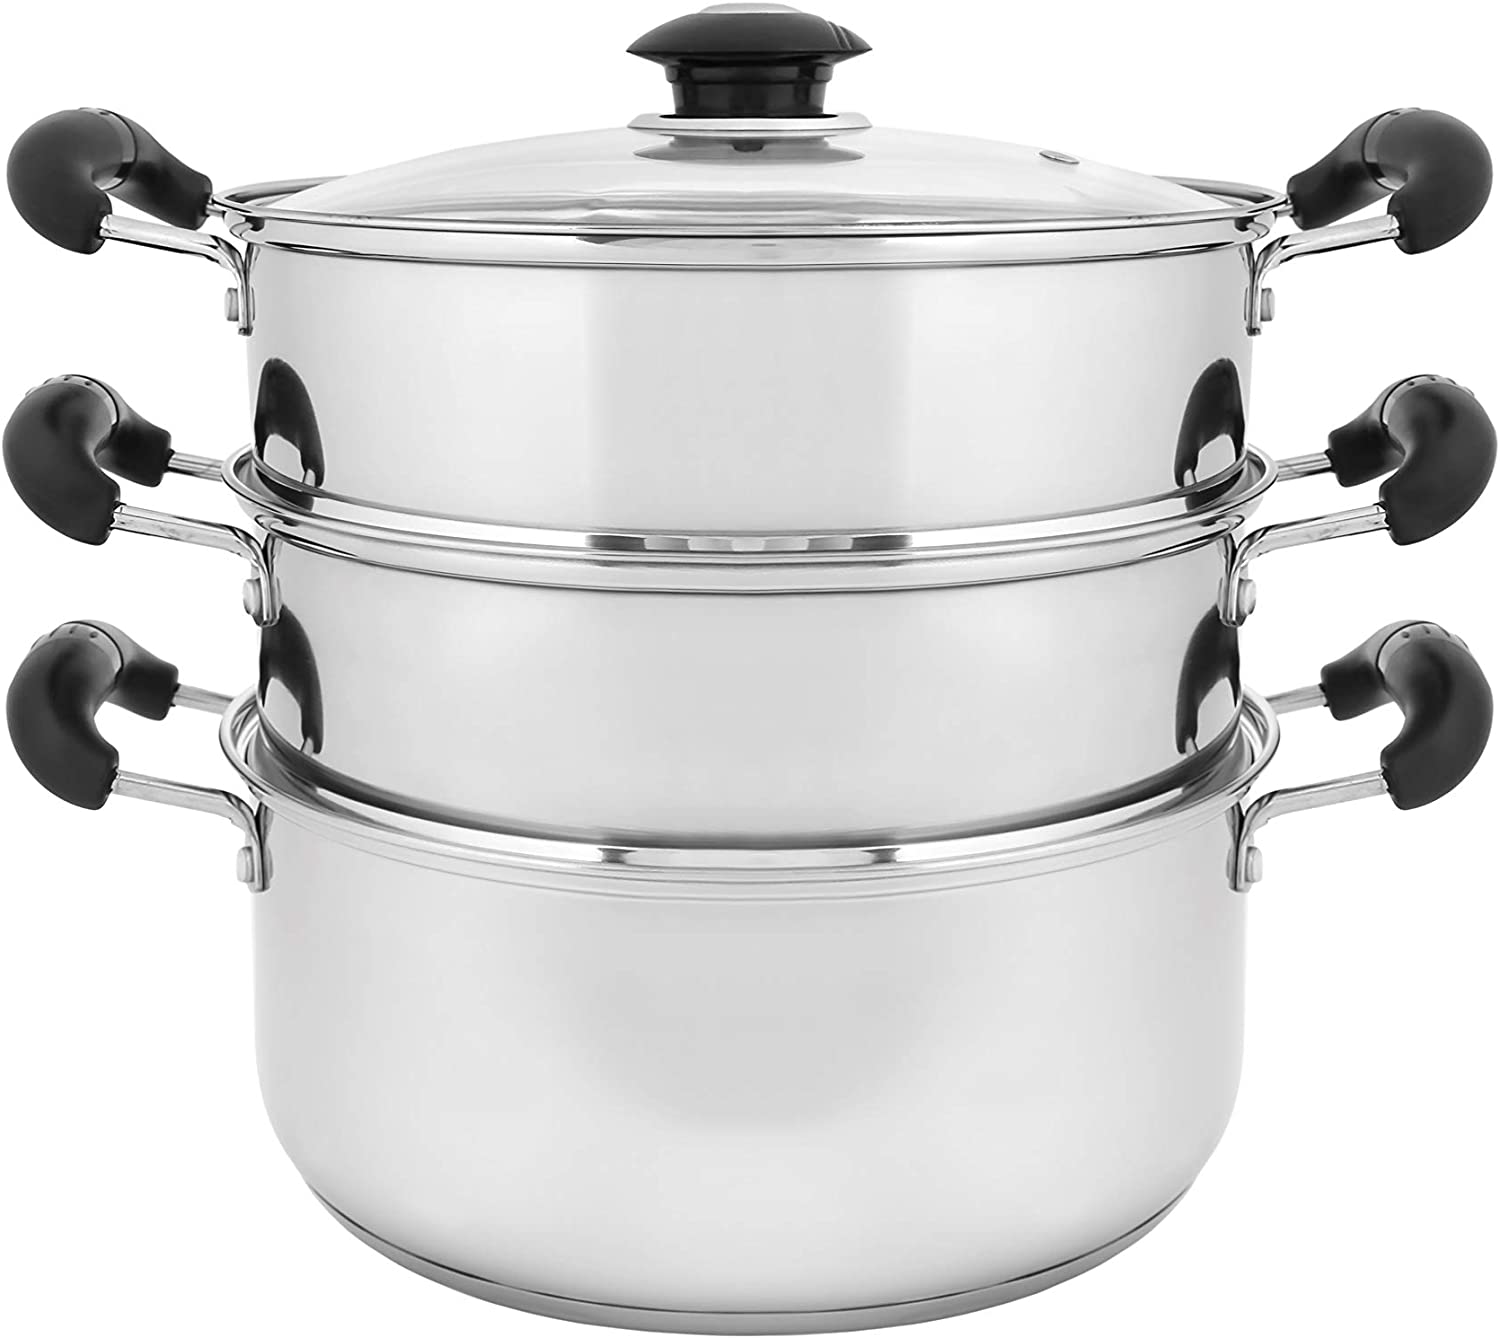 Concord 30 CM Stainless Steel 3 Tier Steamer Pot Steaming Cookware - Triply  Bottom 